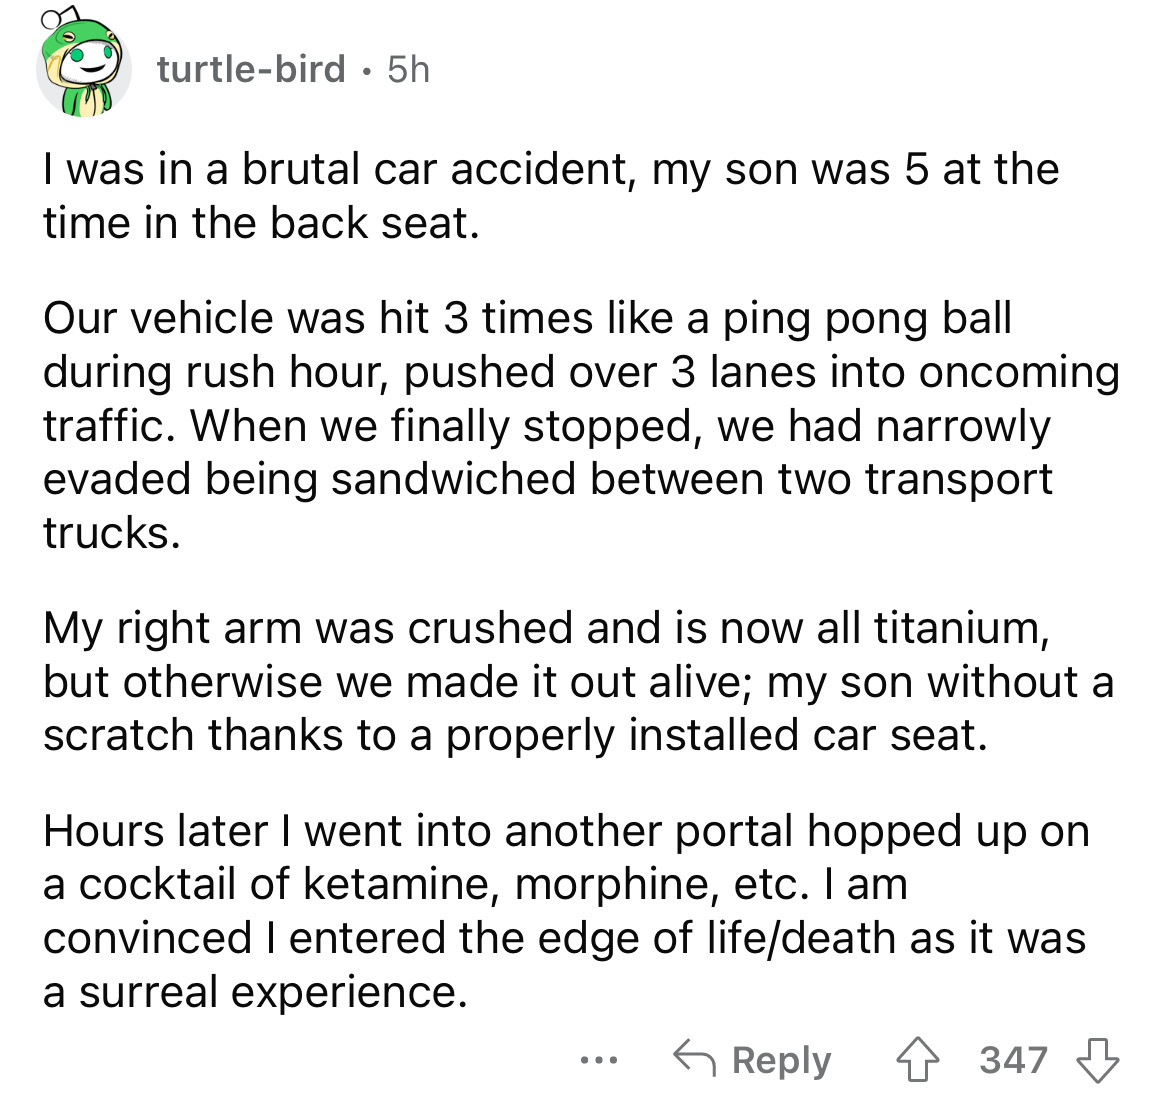 angle - turtlebird 5h I was in a brutal car accident, my son was 5 at the time in the back seat. Our vehicle was hit 3 times a ping pong ball during rush hour, pushed over 3 lanes into oncoming traffic. When we finally stopped, we had narrowly evaded bein